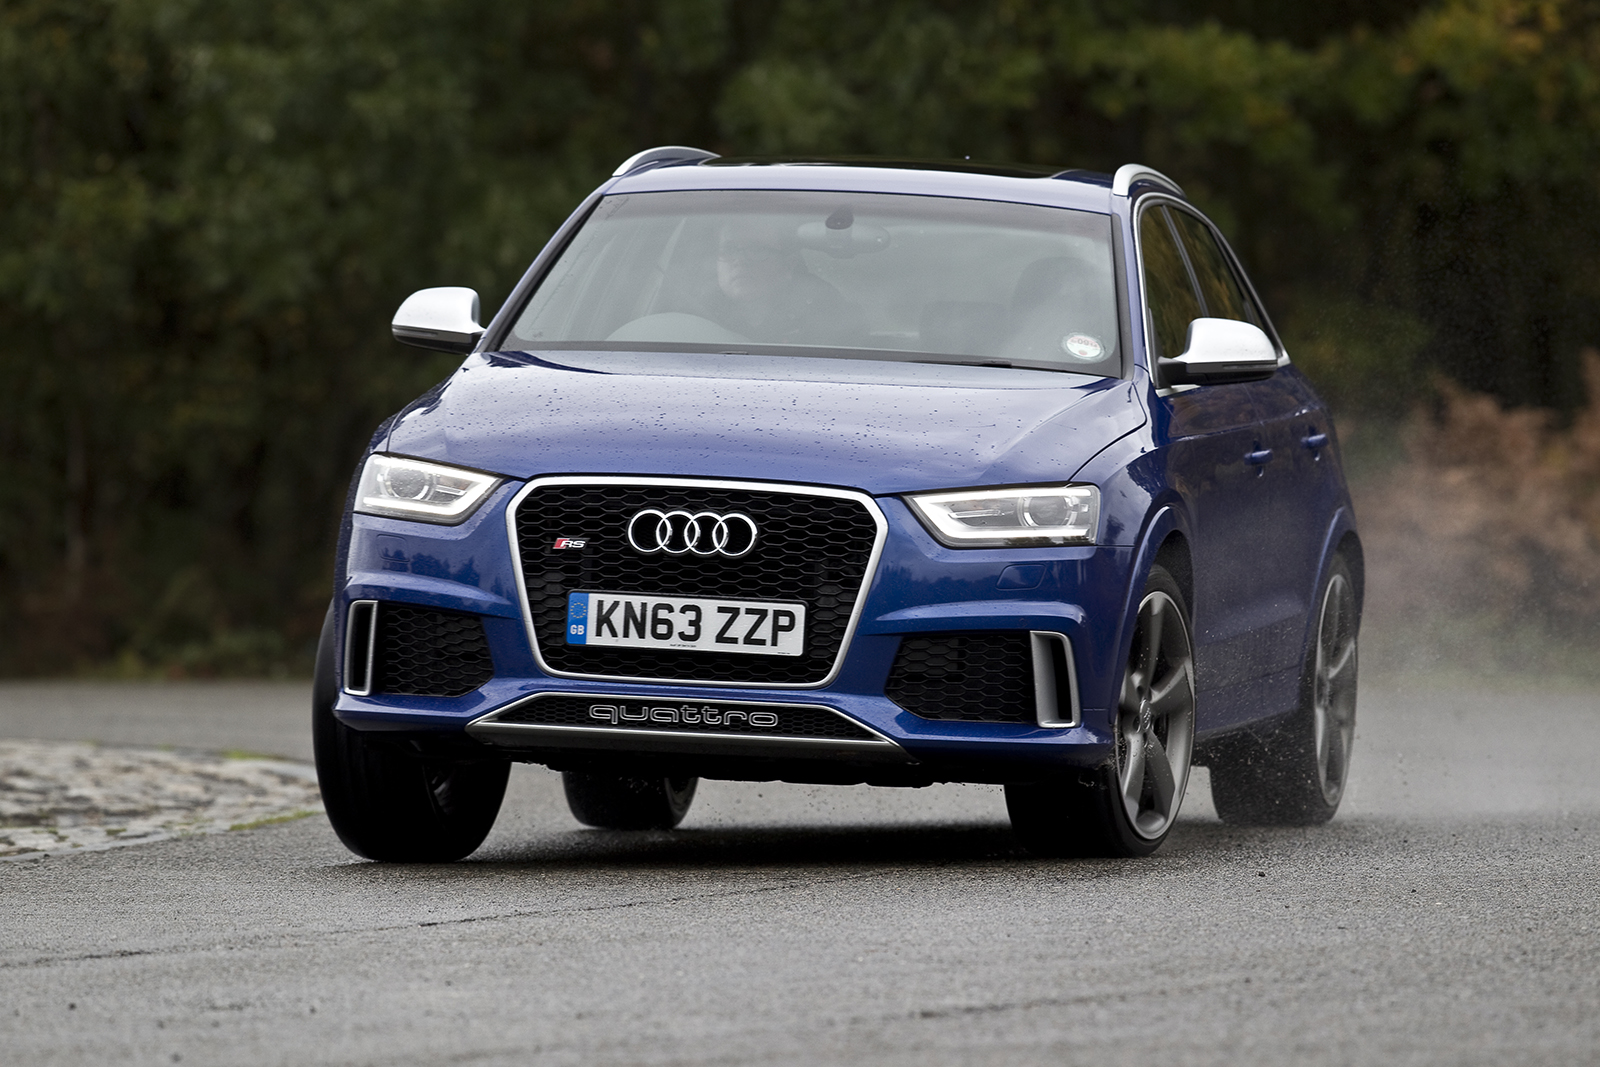 The composed Audi RS Q3